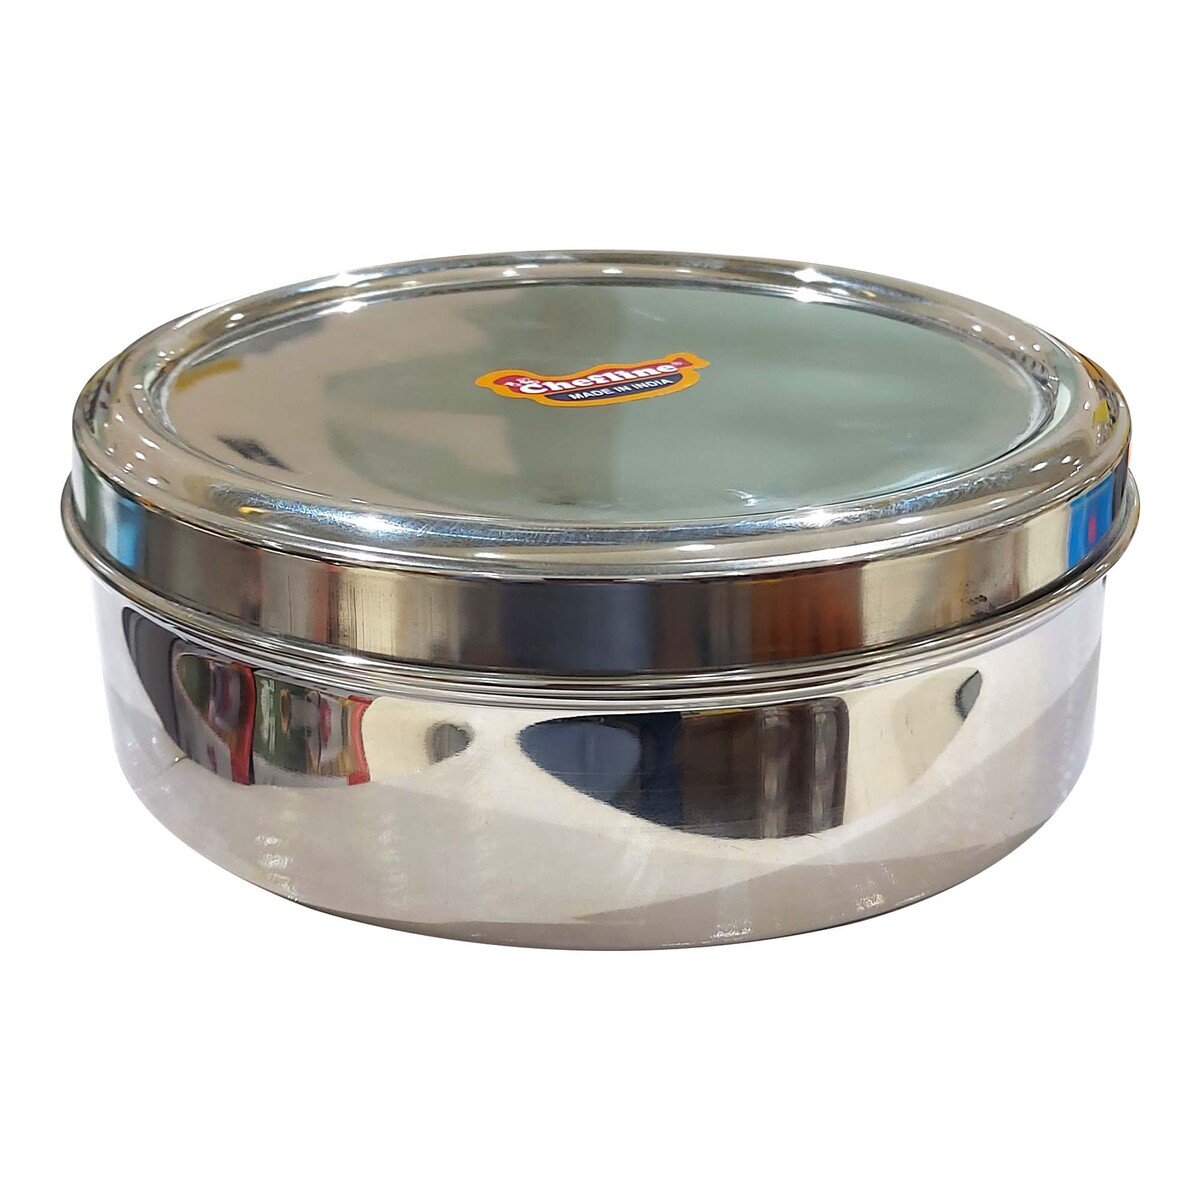 Chefline Stainless Steel Lunch Box Round Large L4 India